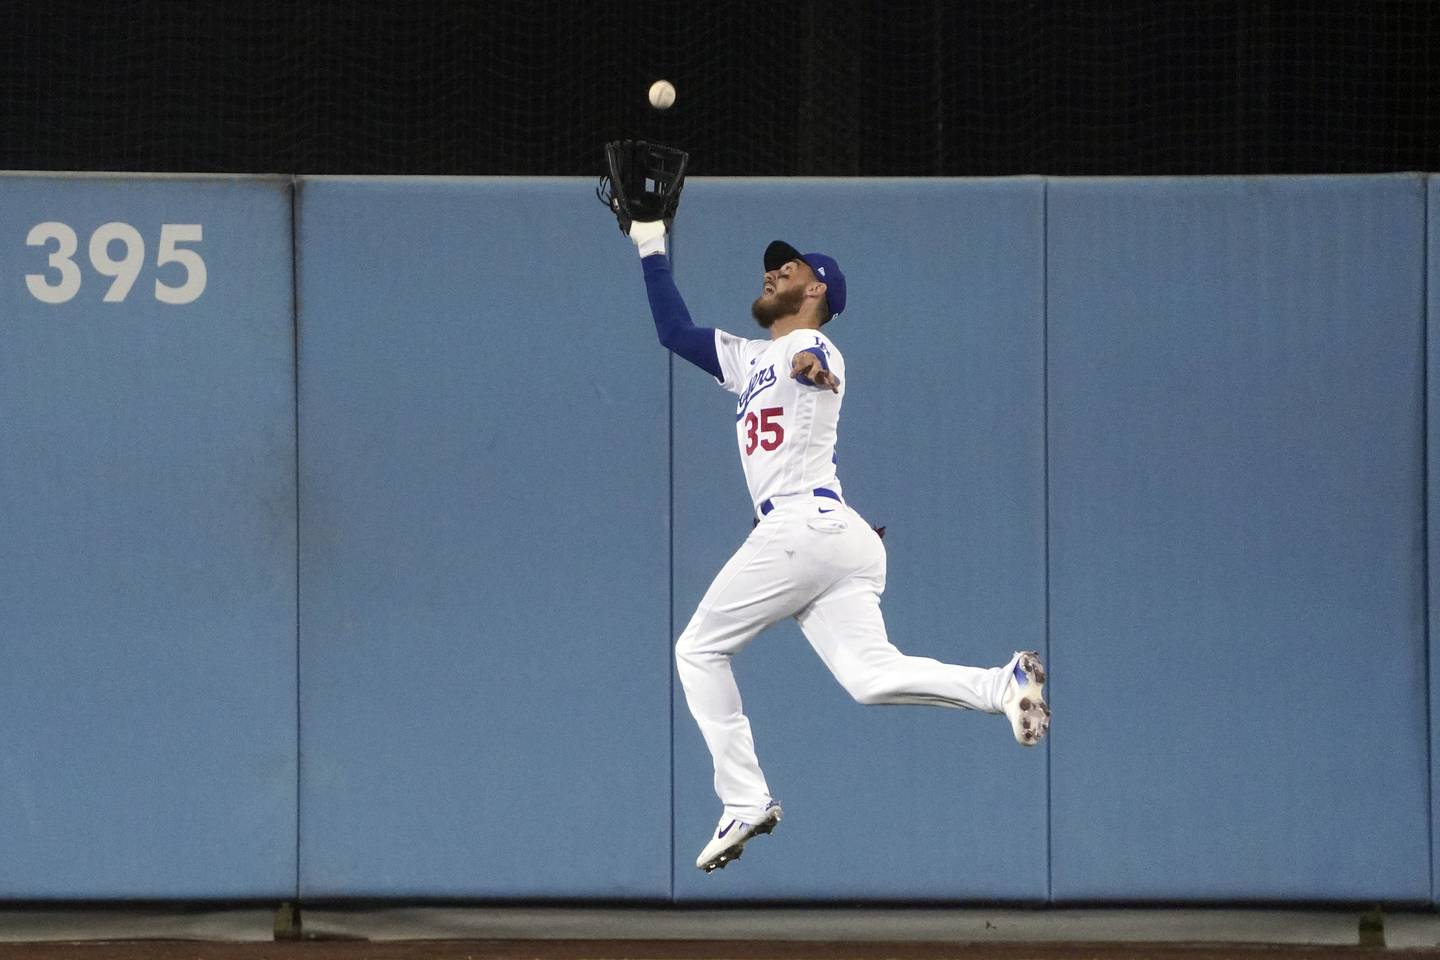 Dodgers center fielder Cody Bellinger makes a leaping catch on a line drive by the Padres' Austin Nola during the sixth inning on Oct. 12, 2022.